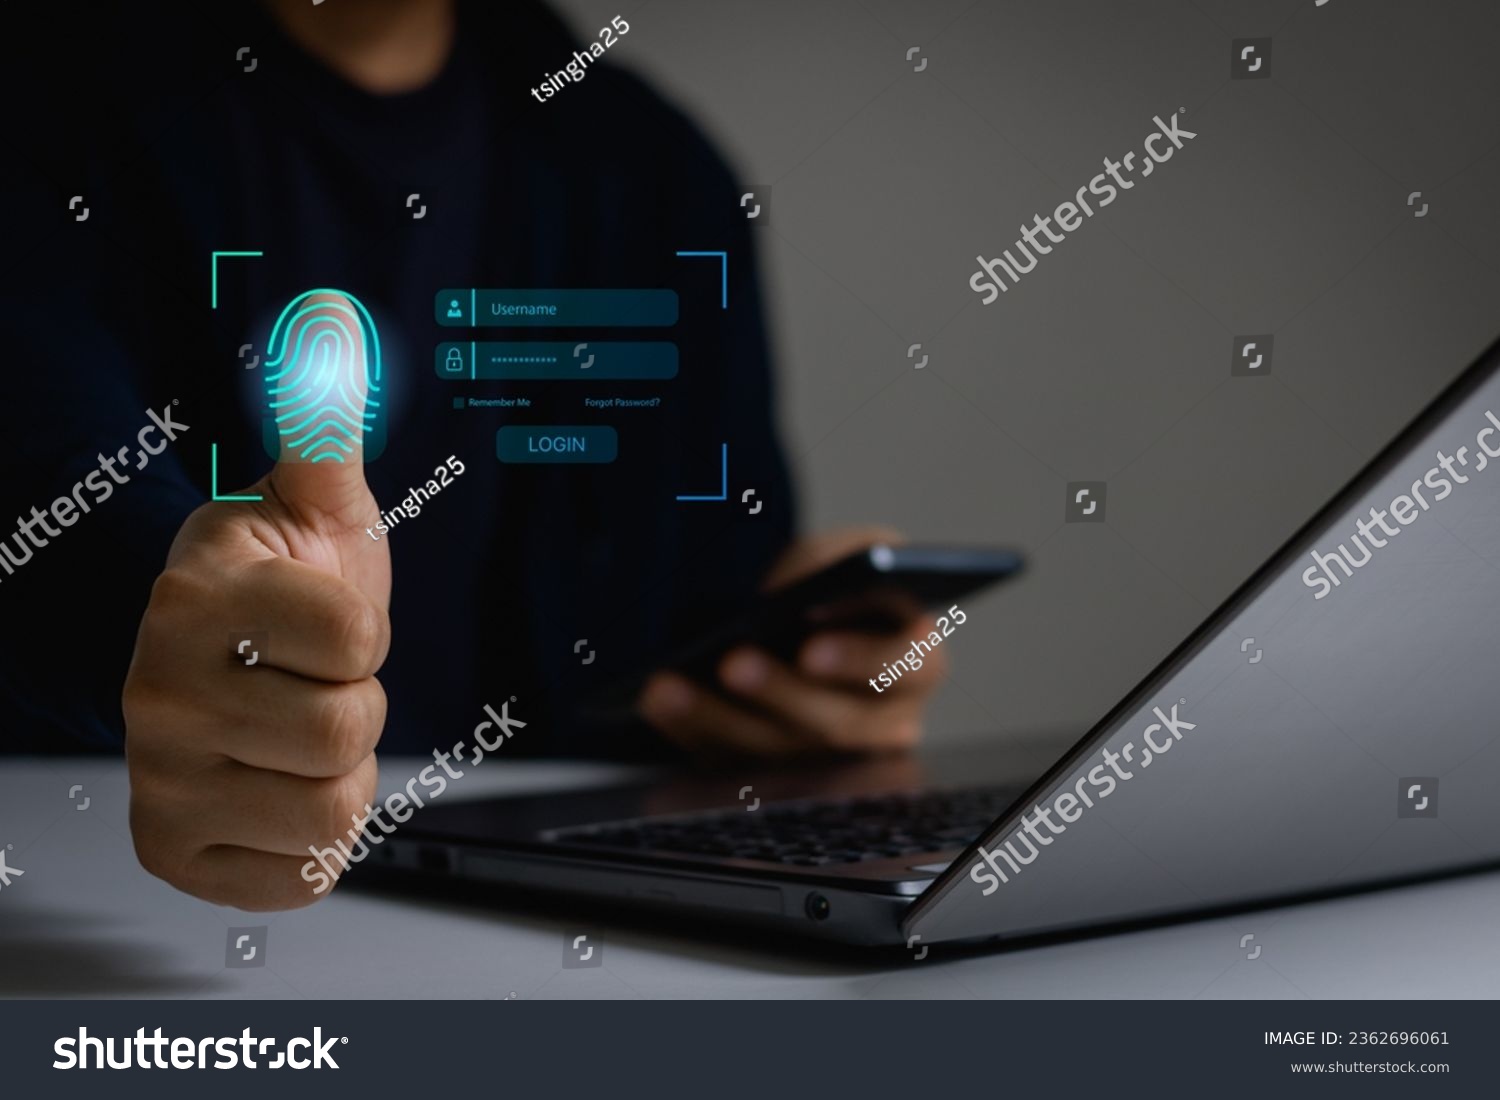 Cyber security concept. Businessman login with fingerprint scanning technology. fingerprint to identify personal. Fingerprint scan provides security access with biometrics identification. #2362696061